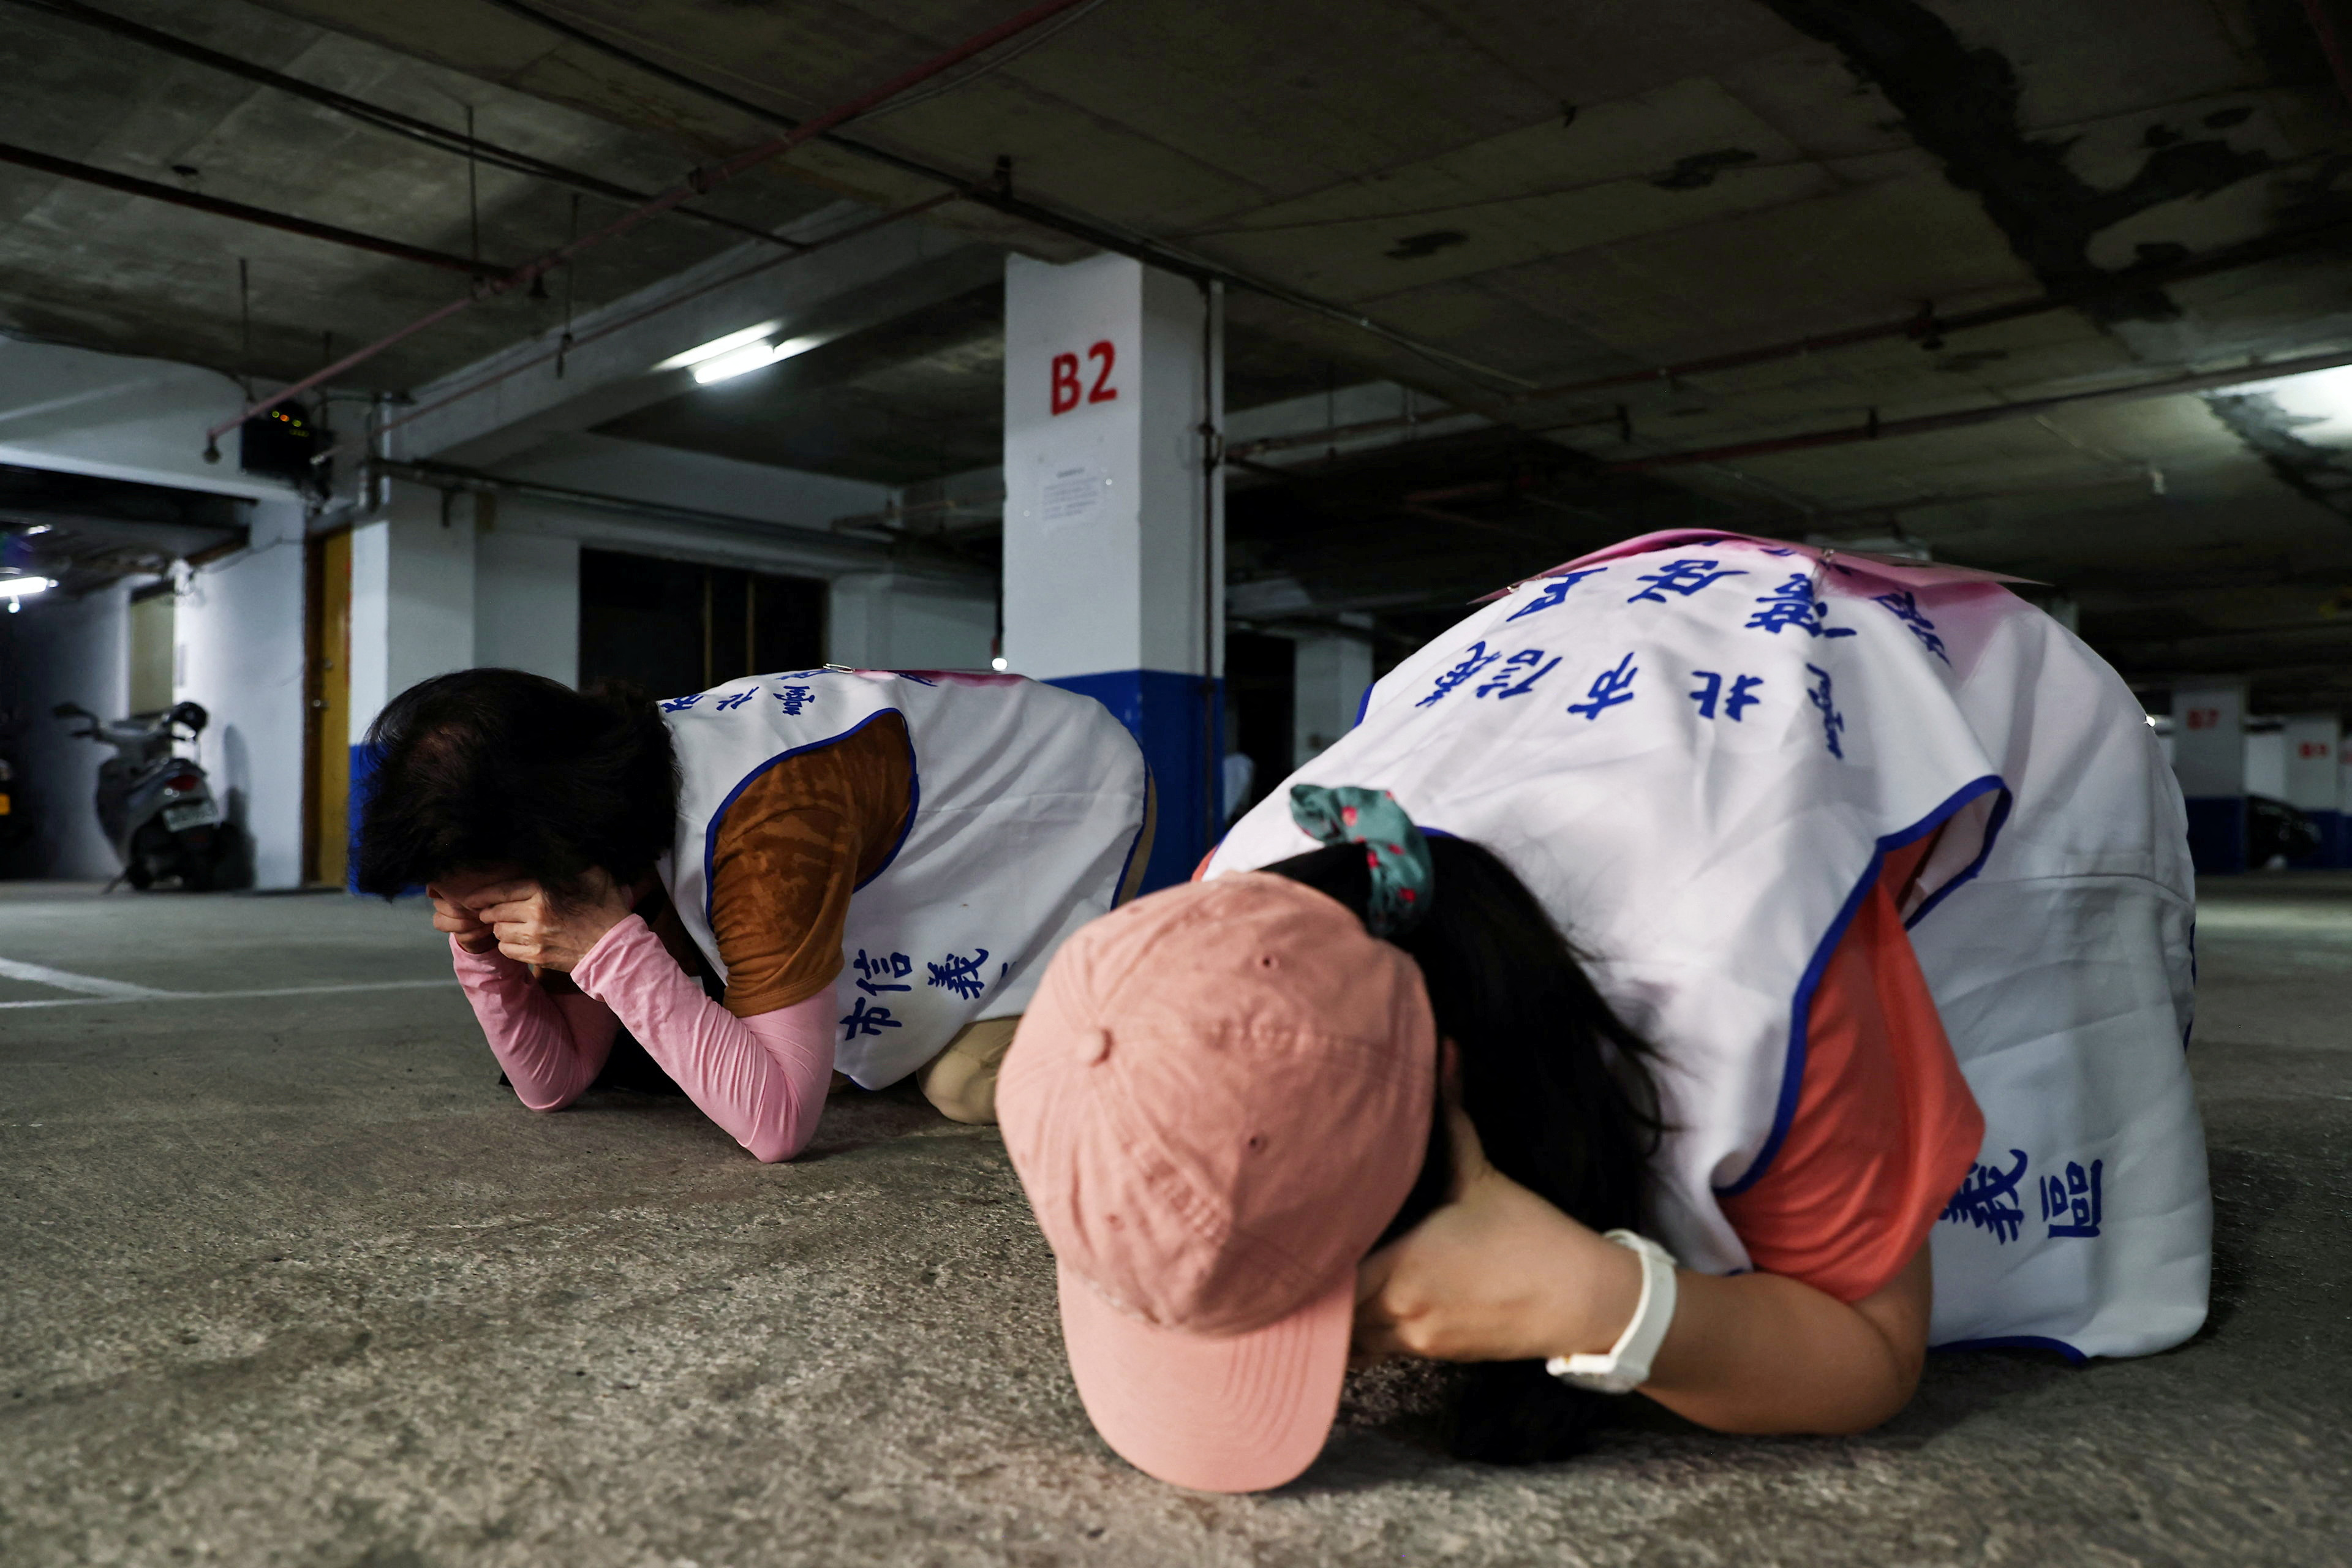 People demonstrate taking shelter during a drill at a basement parking lot in Taipei